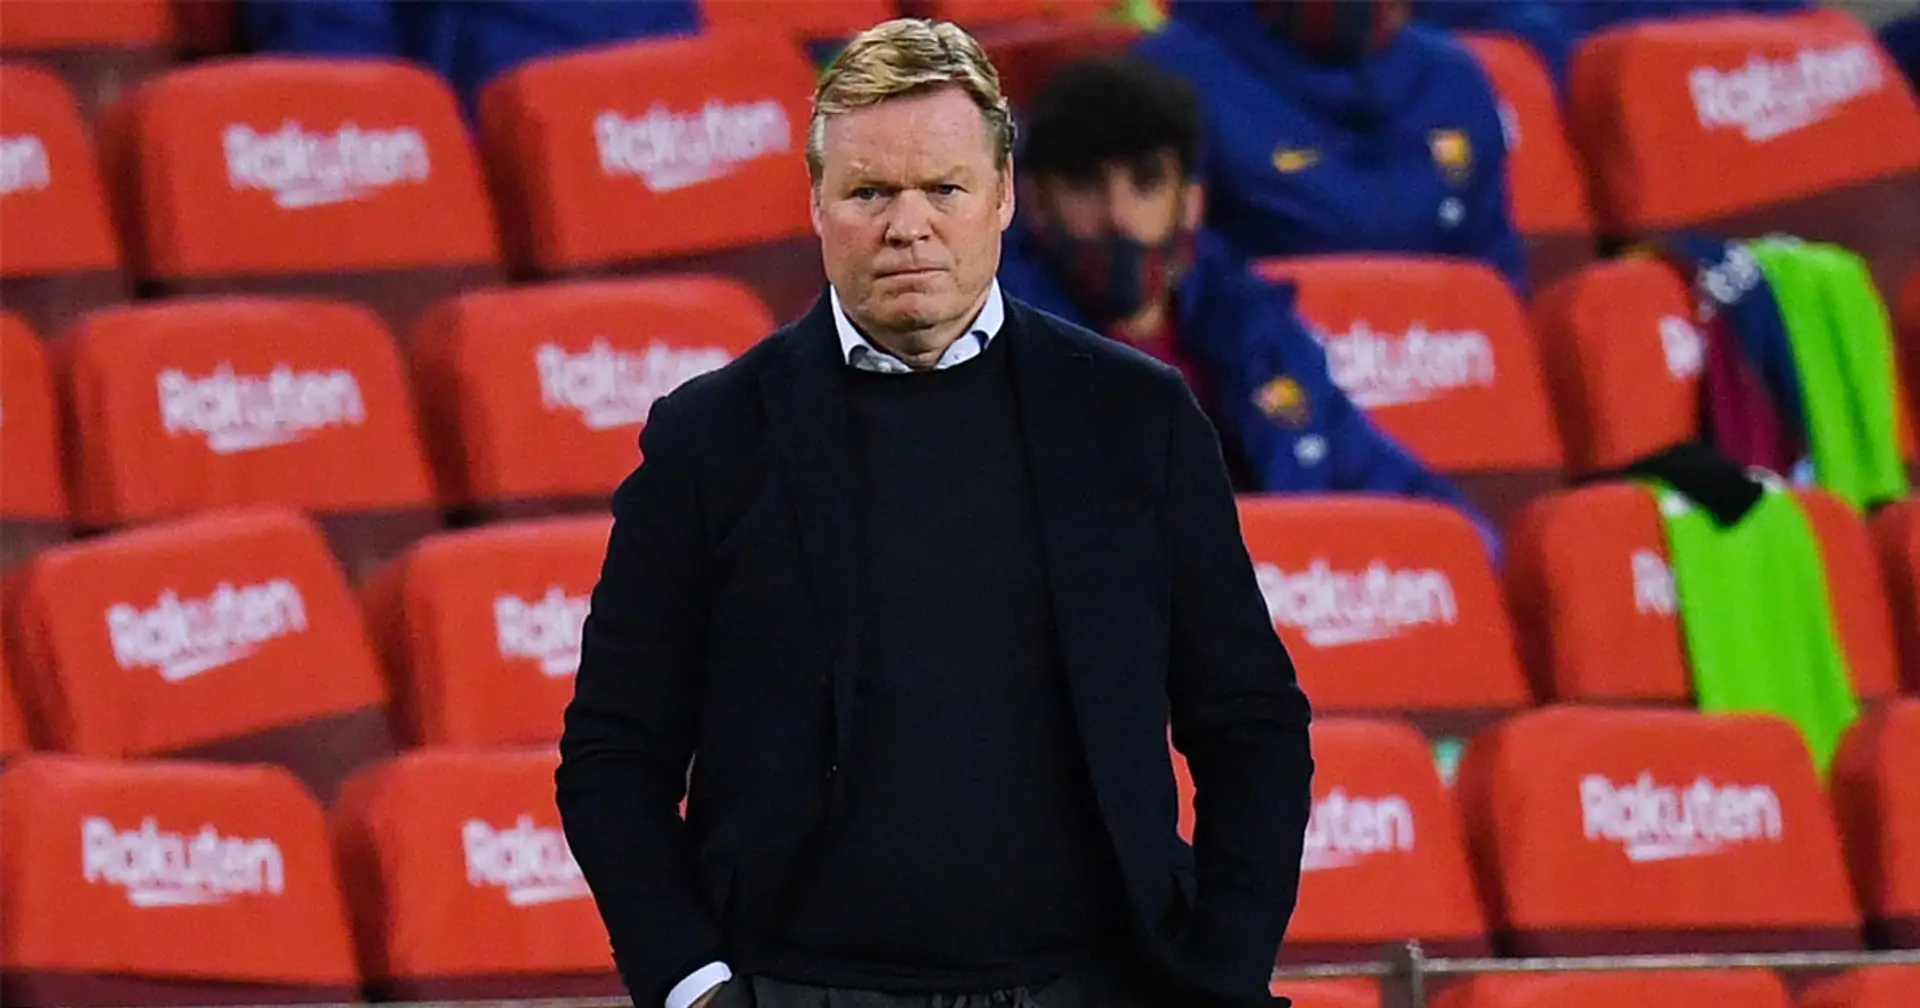 10th final as coach coming up: how Ronald Koeman fares in final matches